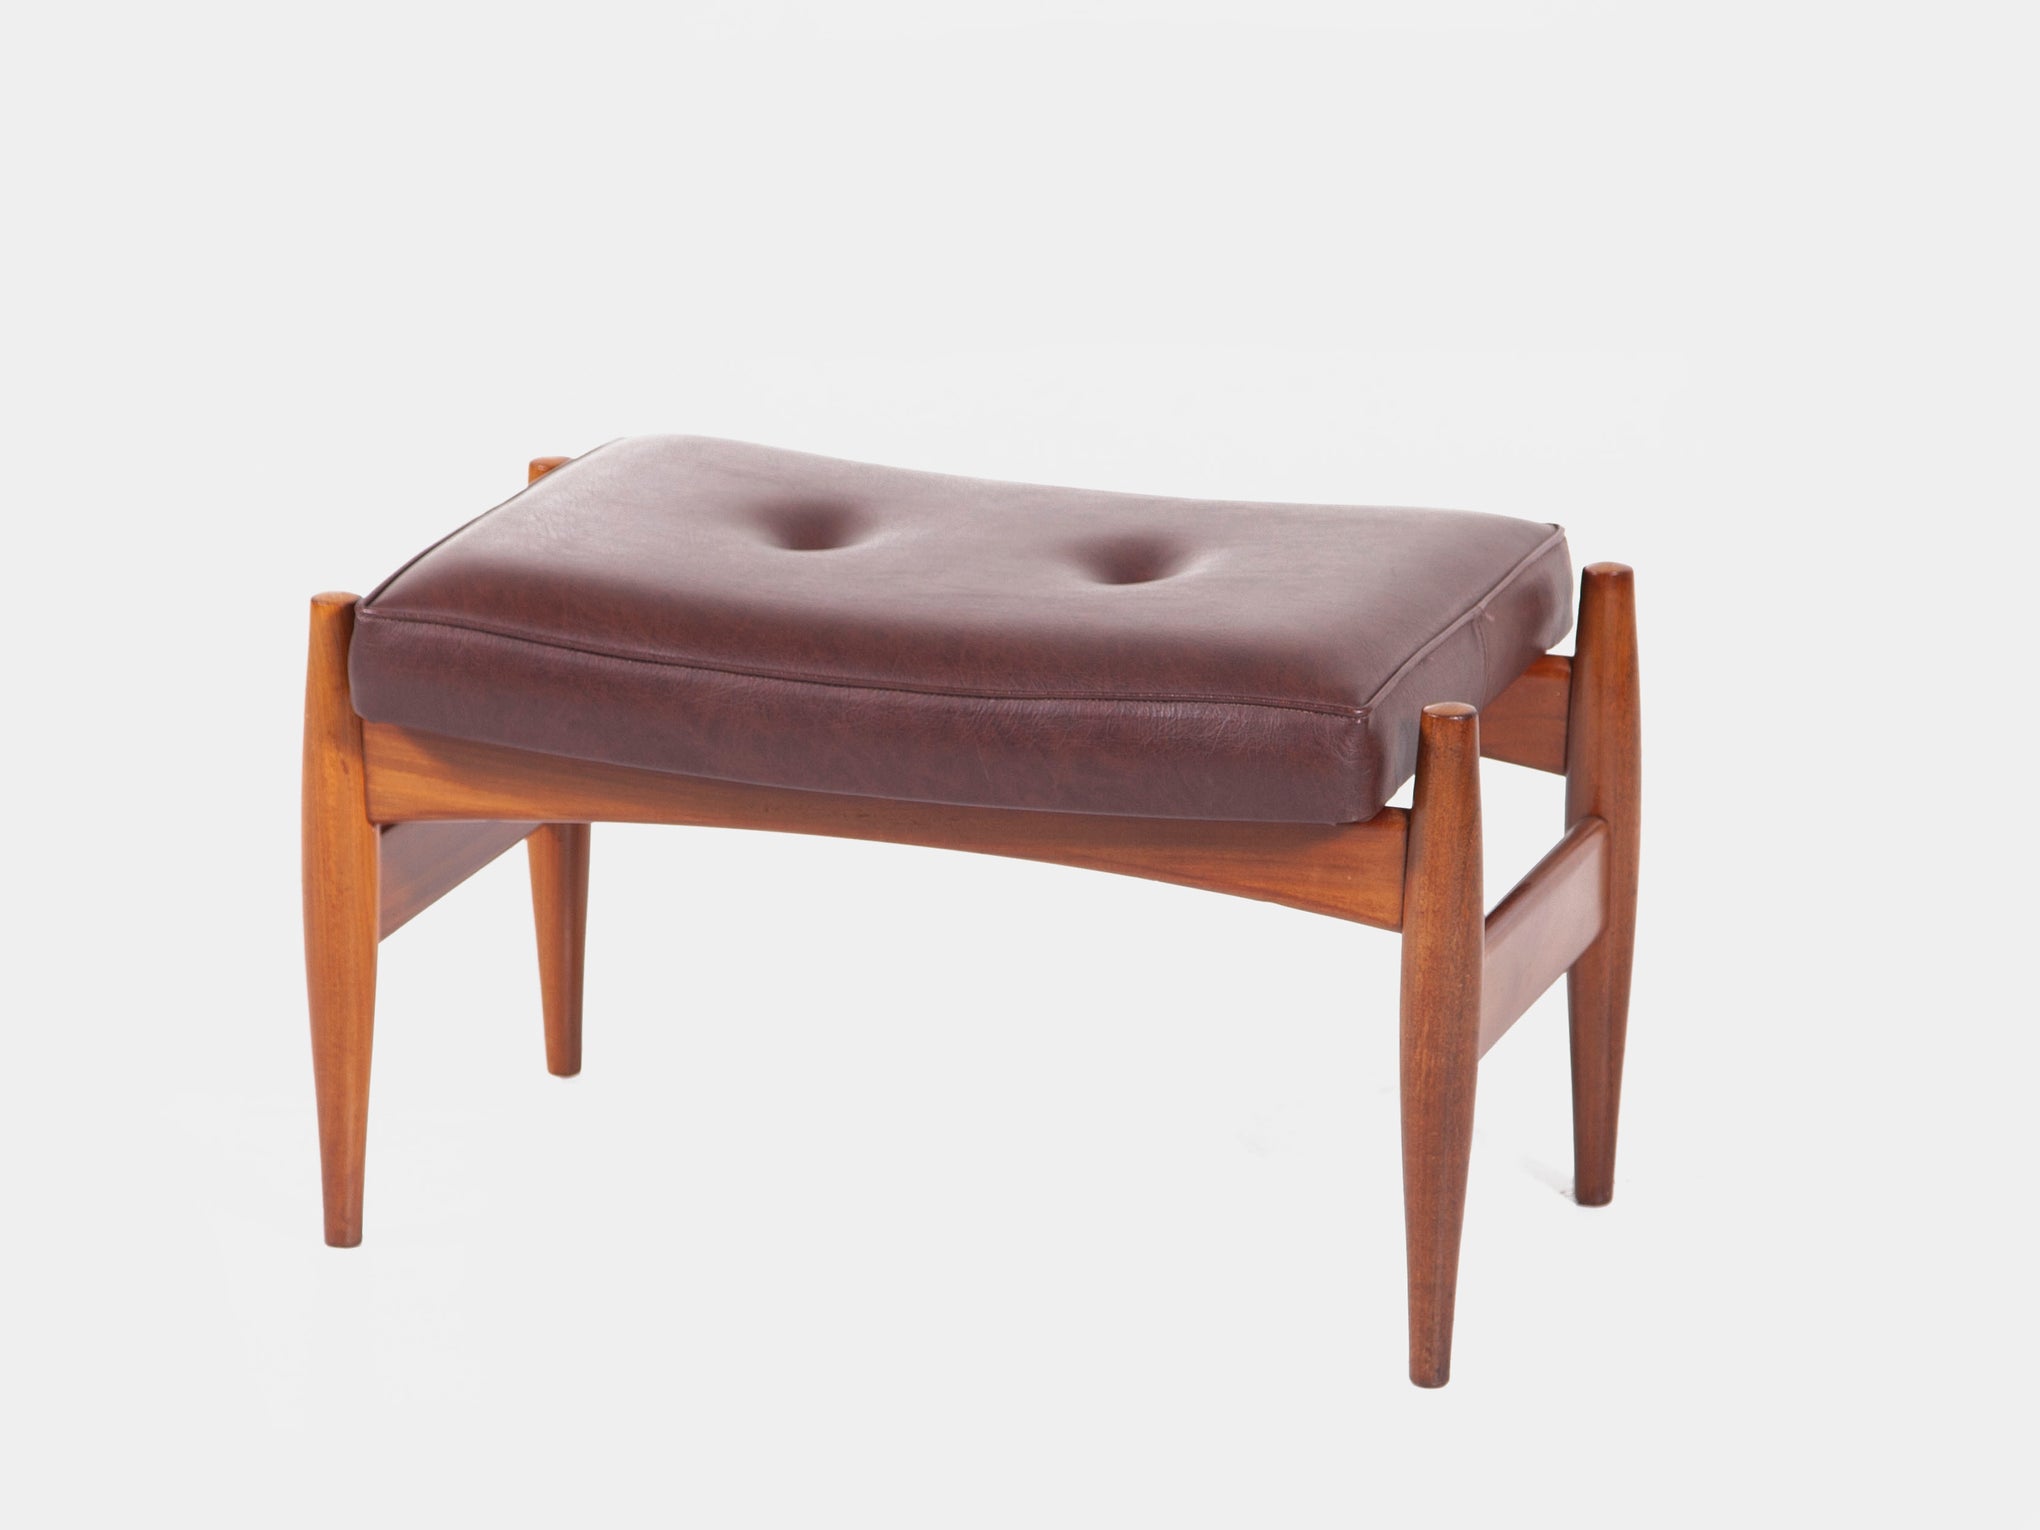 Teak wood ottoman with brown leatherette from Denmark